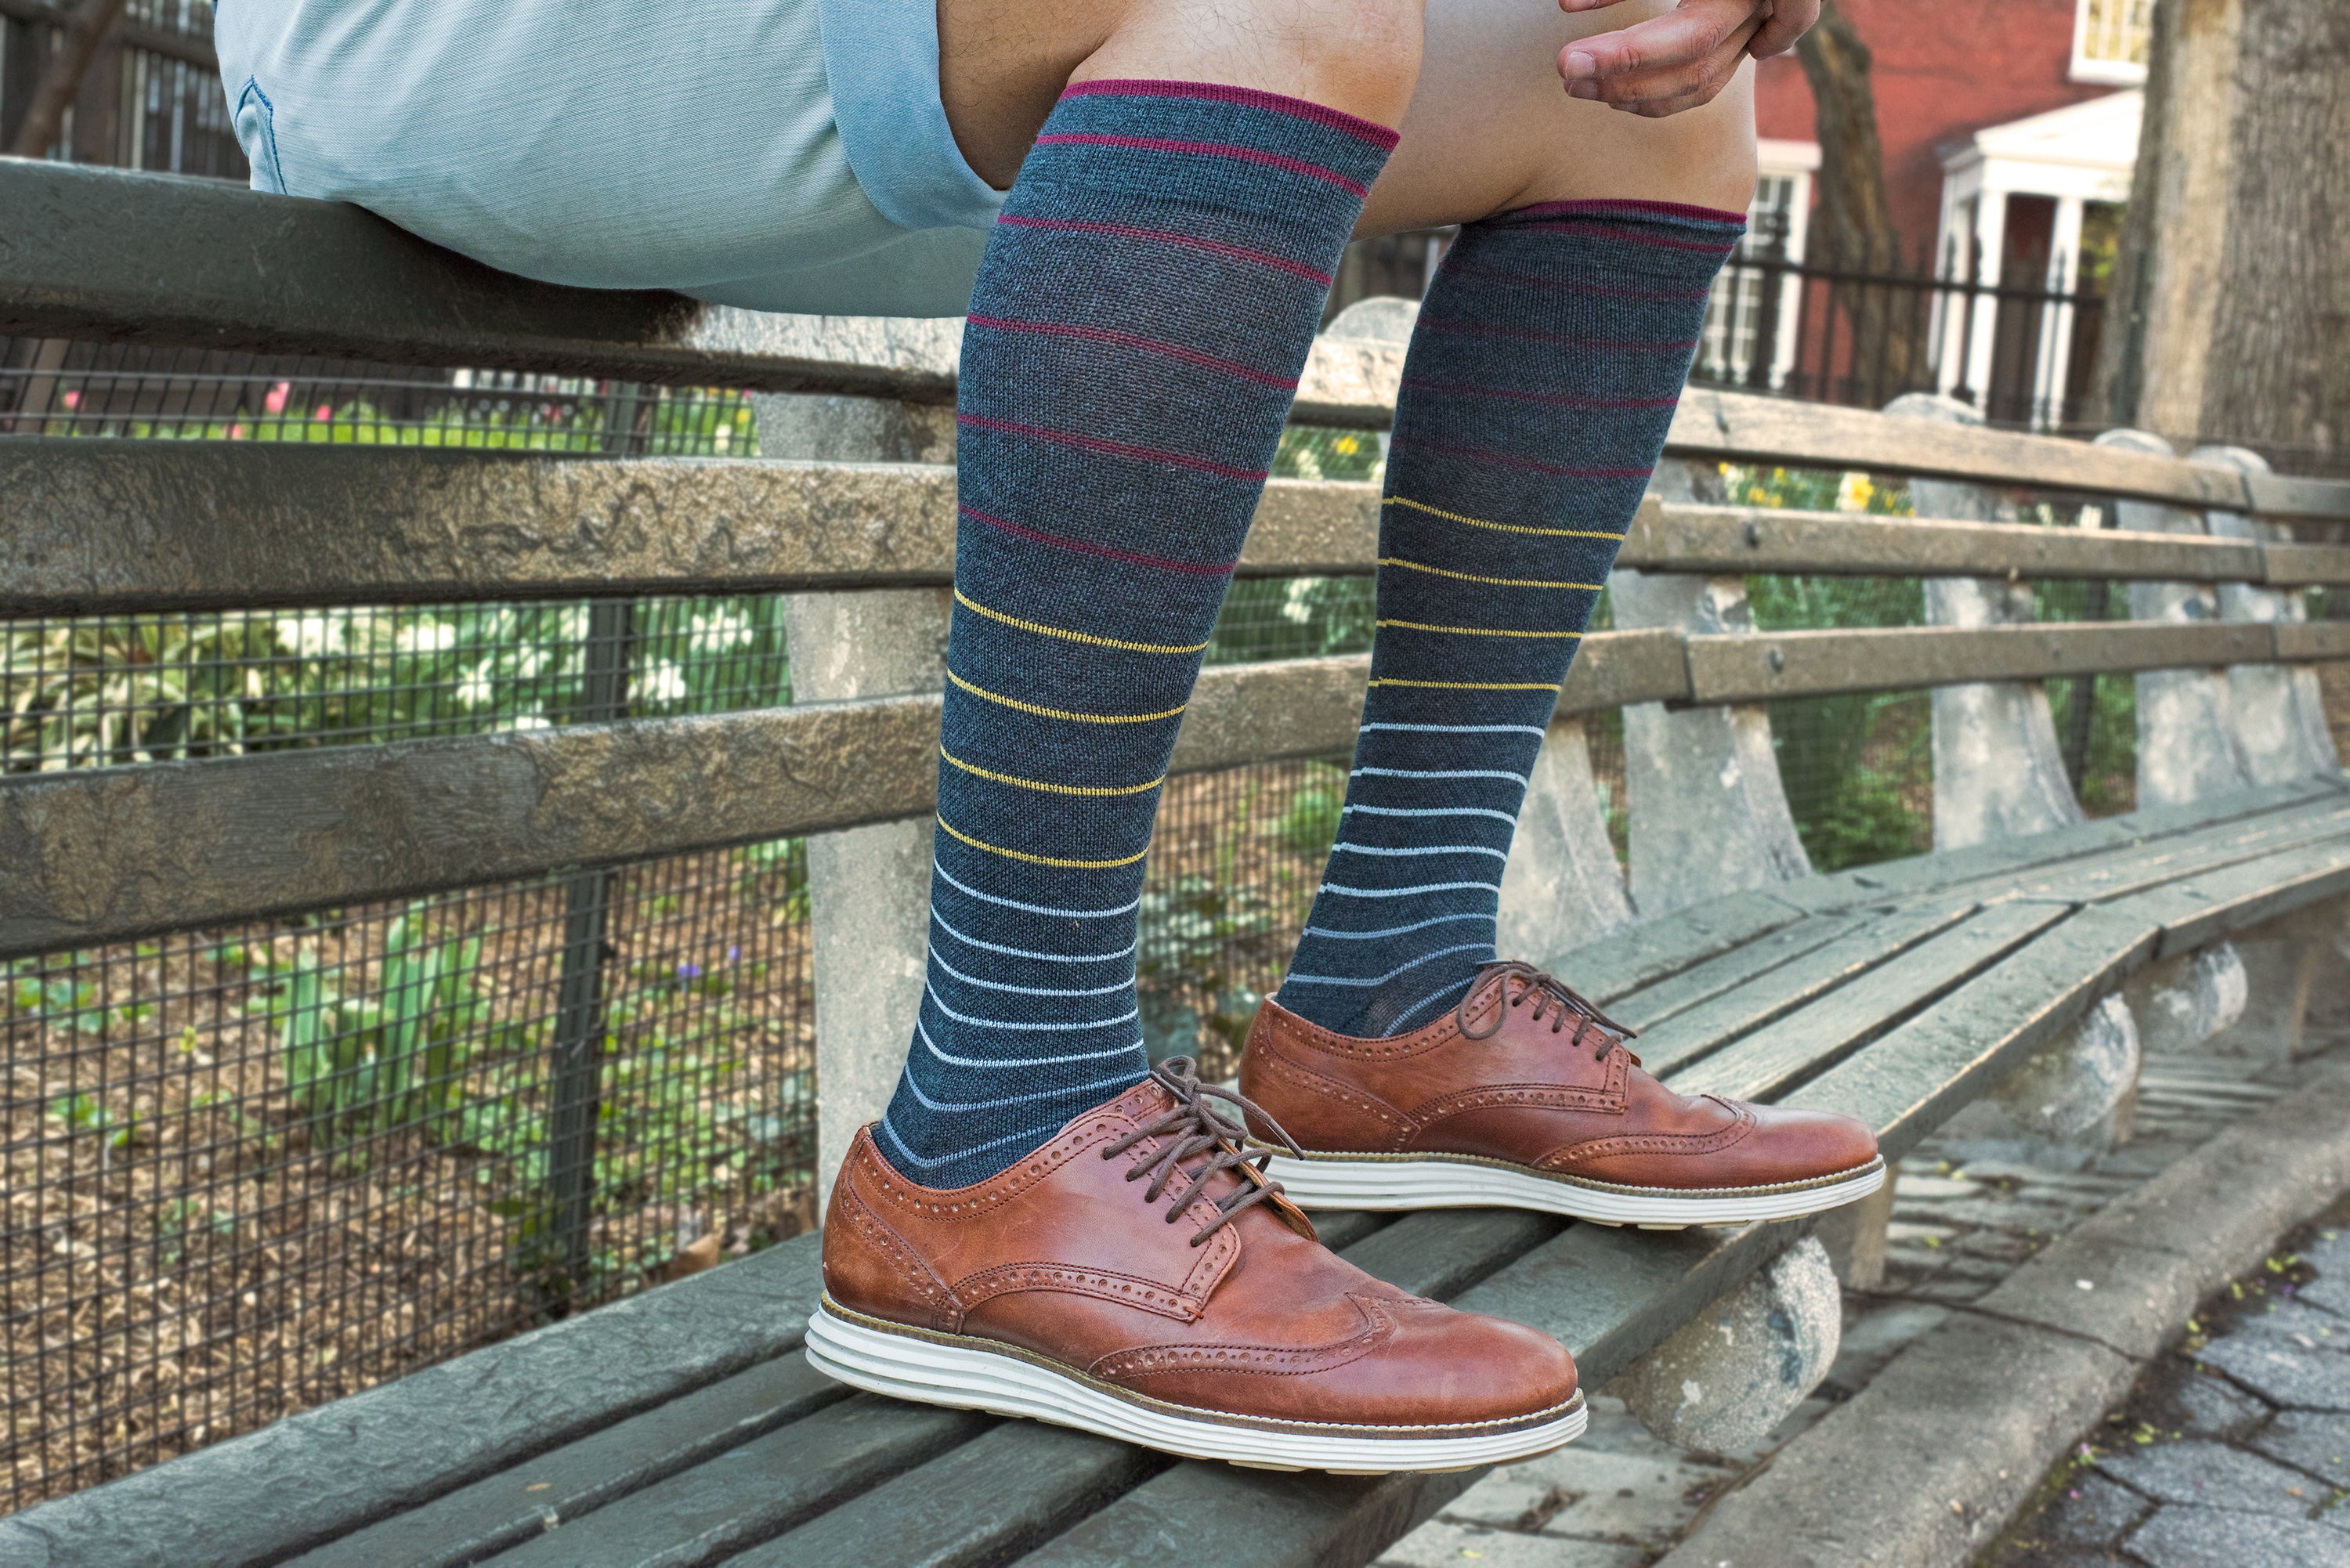 Complete Dress Sock Style Guide: The Do's and Don'ts